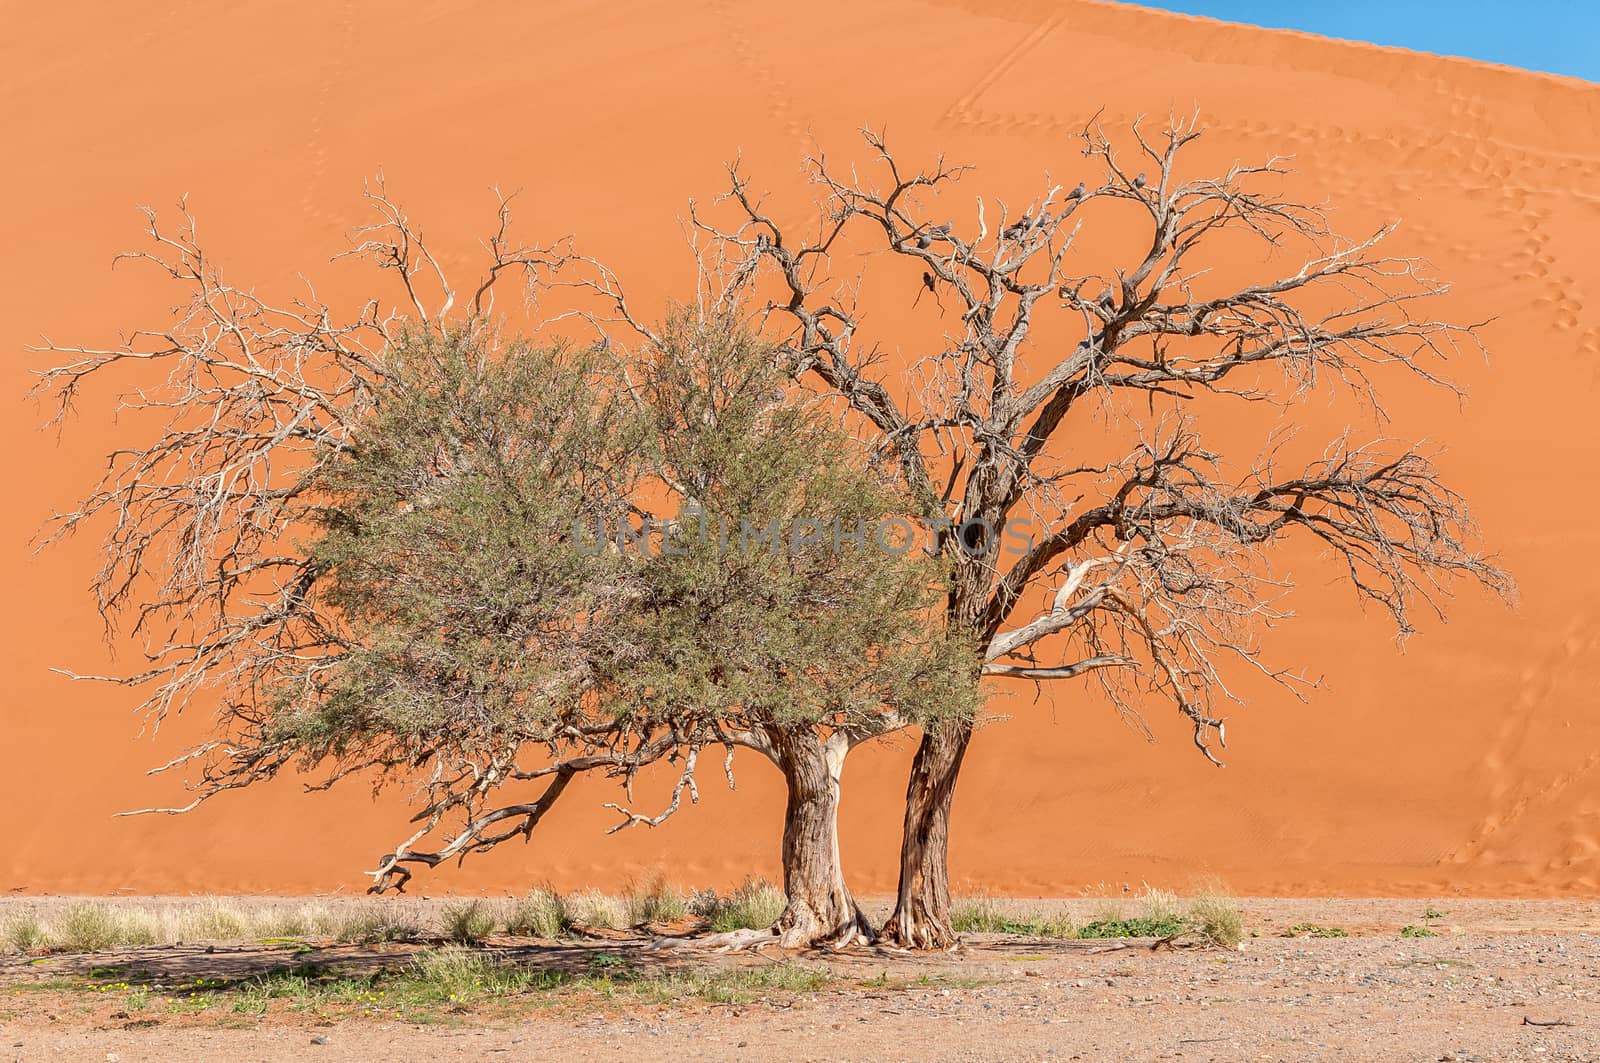 Camelthorn trees against the orange backdrop of Dune 45  by dpreezg